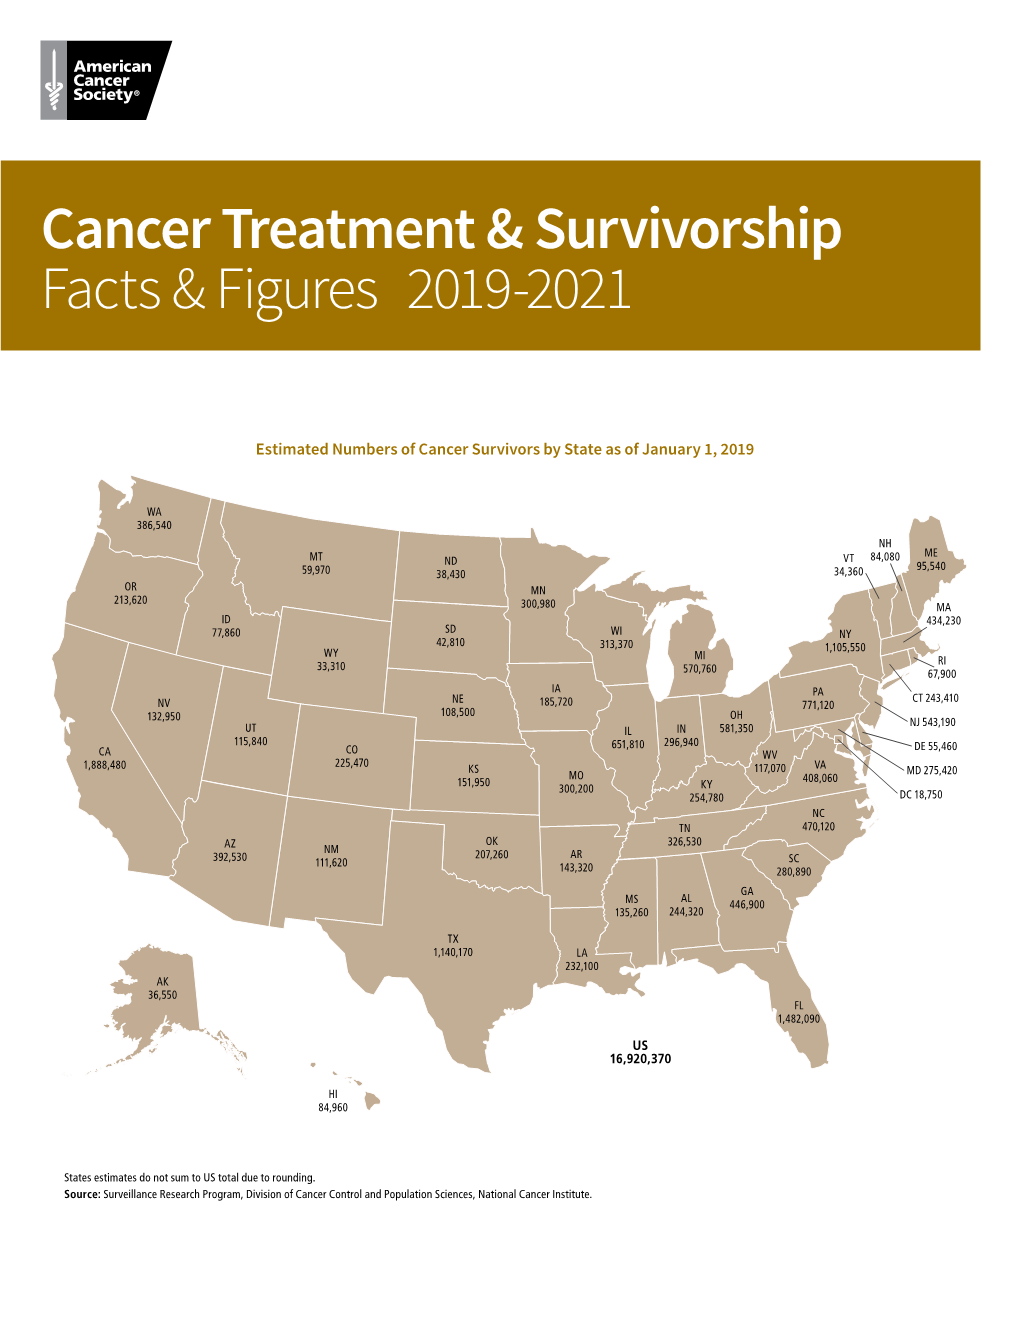 Cancer Treatment and Survivorship Facts & Figures 2019-2021